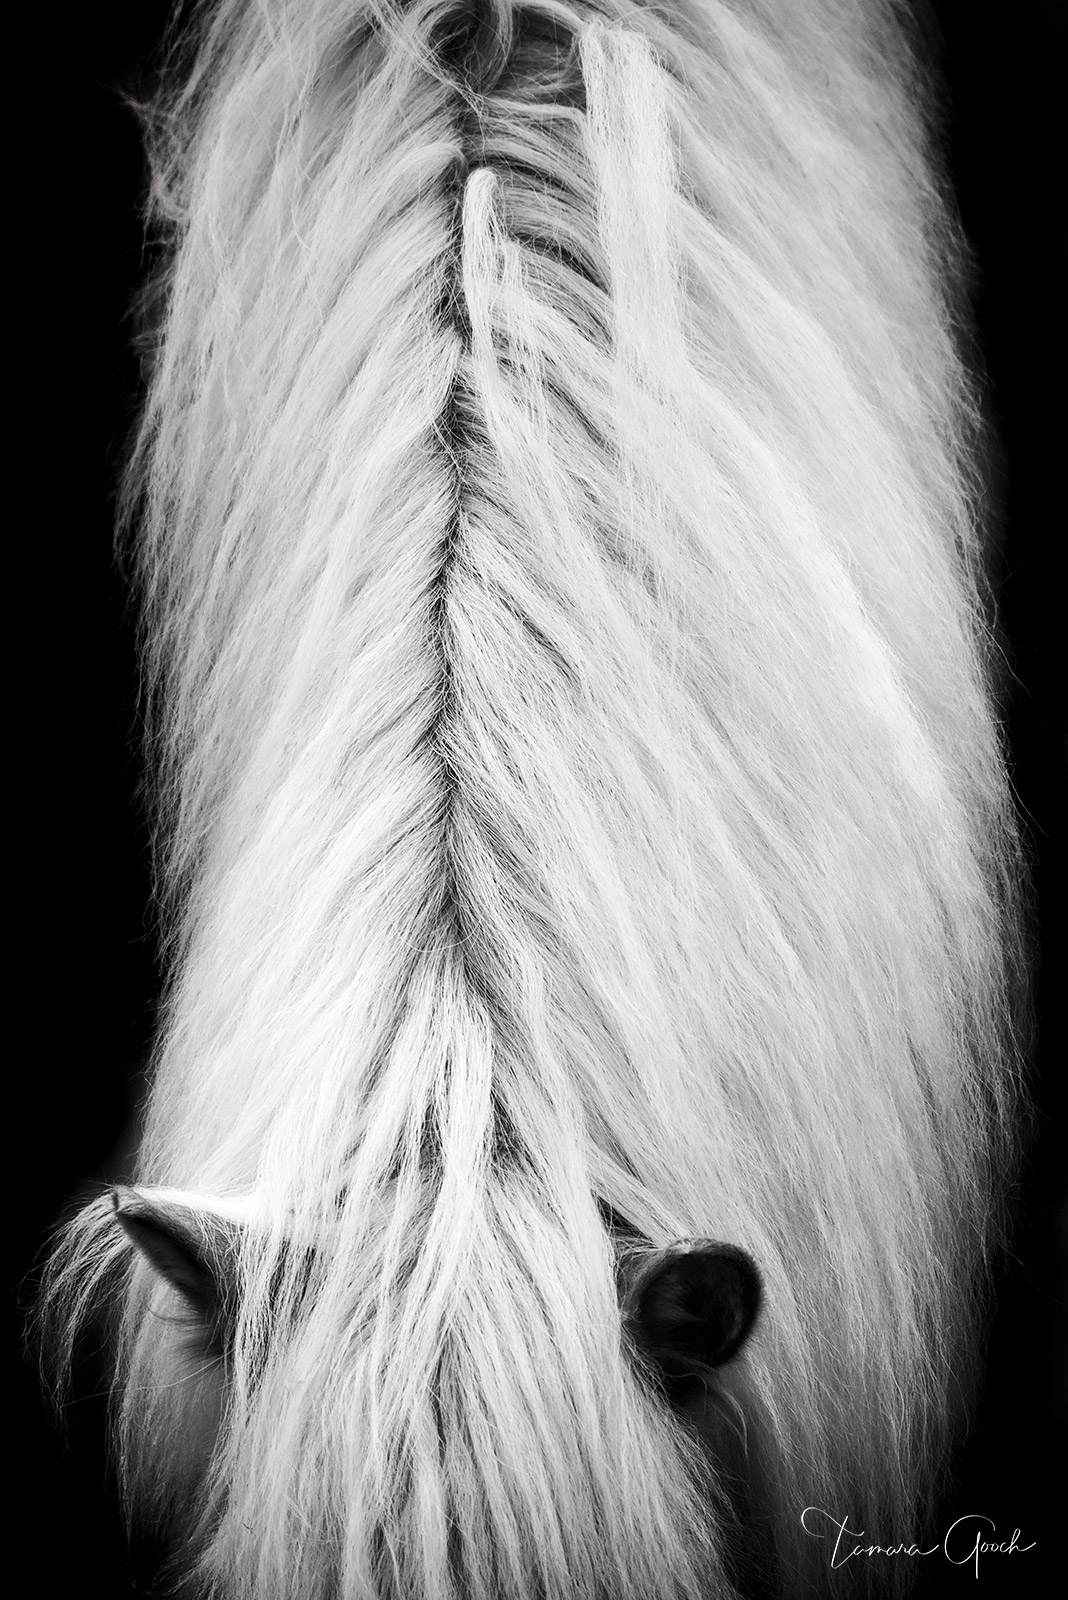 Black and white fine are equestrian horse print of a Haflinger horses mane, neck and ears. Great equine wall art and home decor. Gallery quality.